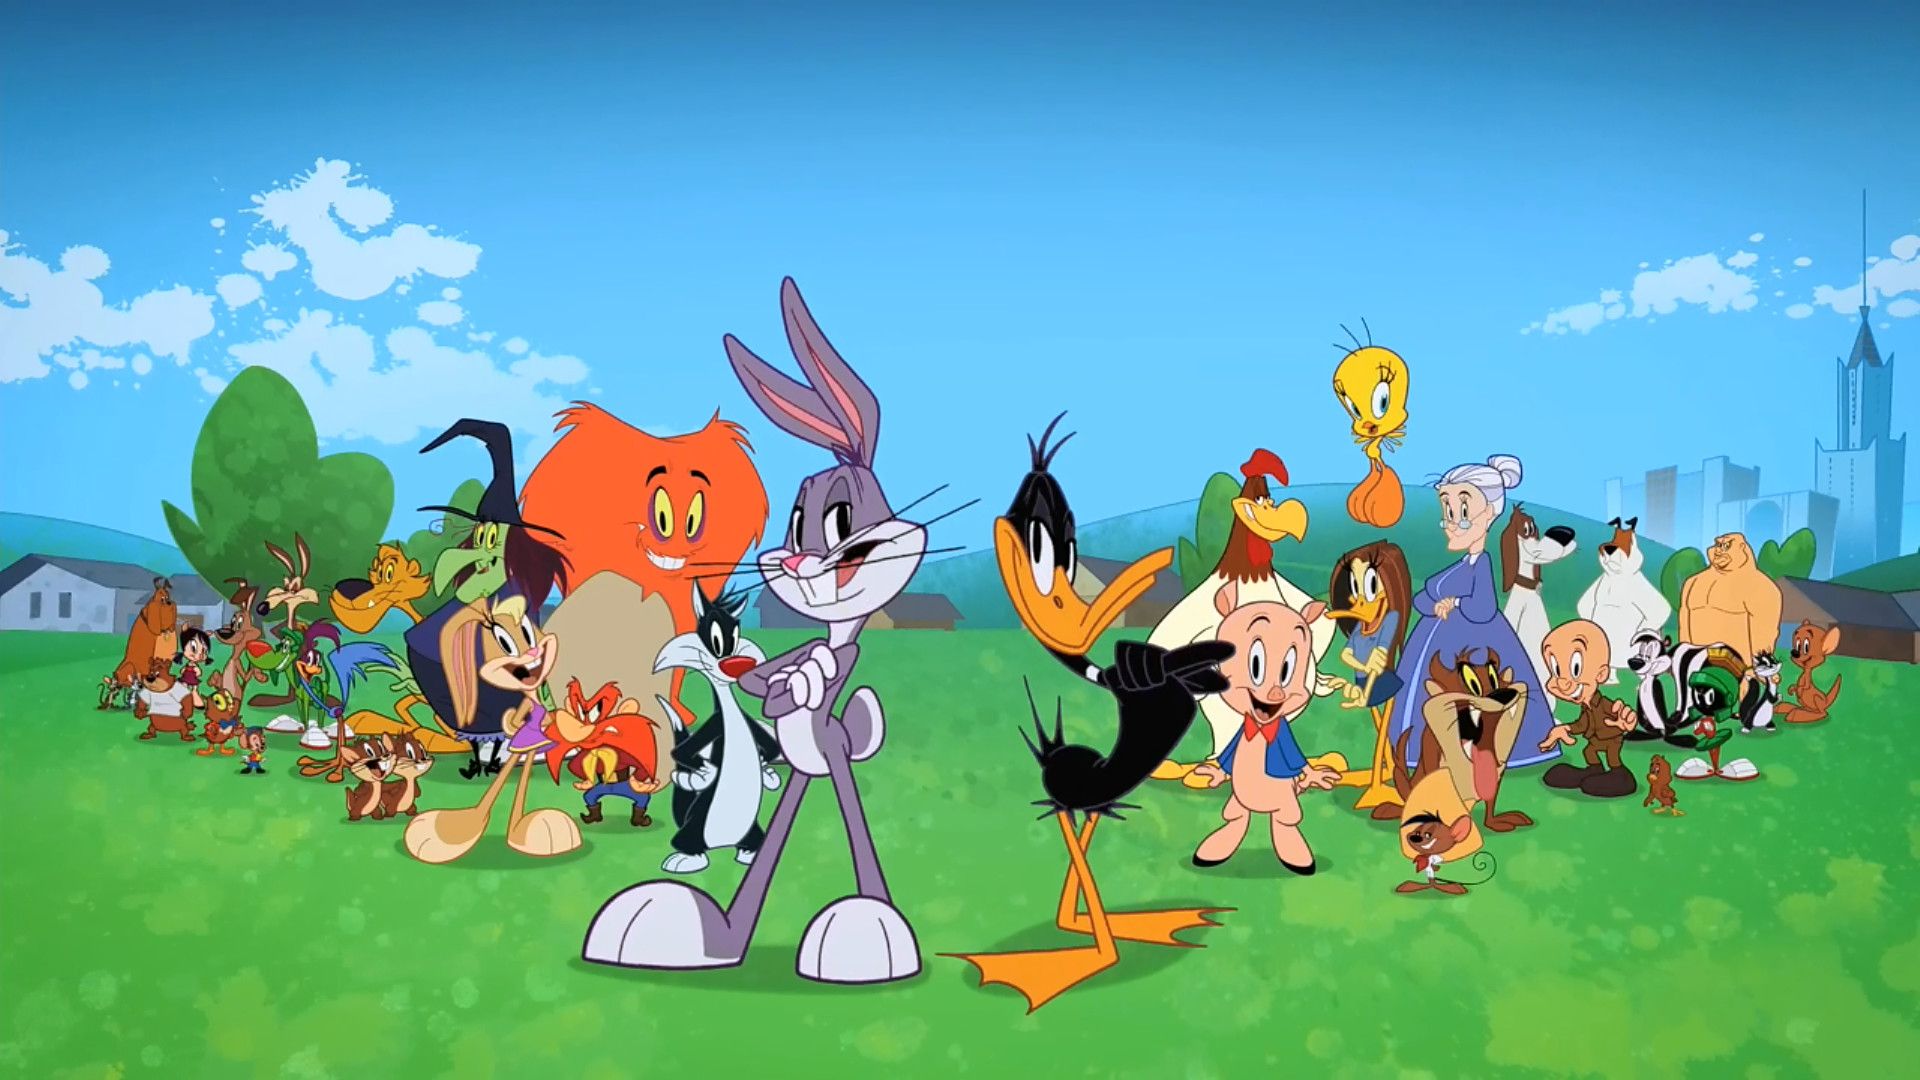 Looney Tunes Cartoons is a new series of short cartoons featuring classic Looney Tunes characters. - Looney Tunes